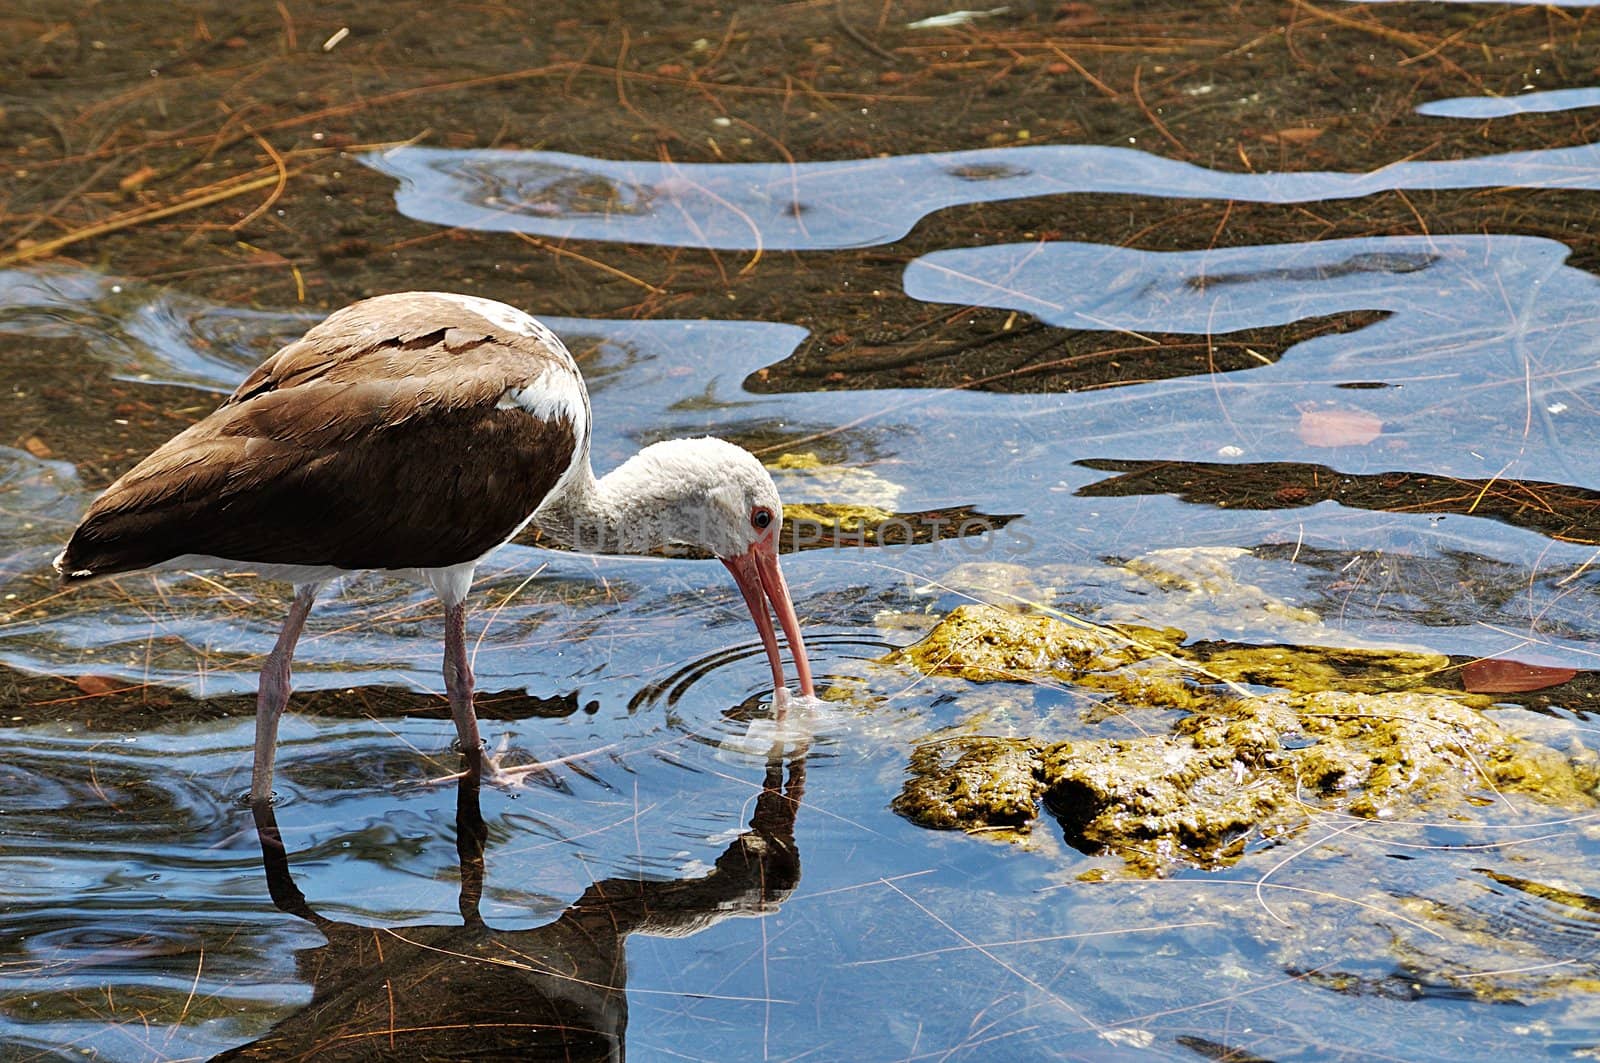 Young immature ibis hunts for food in South Florida lake.